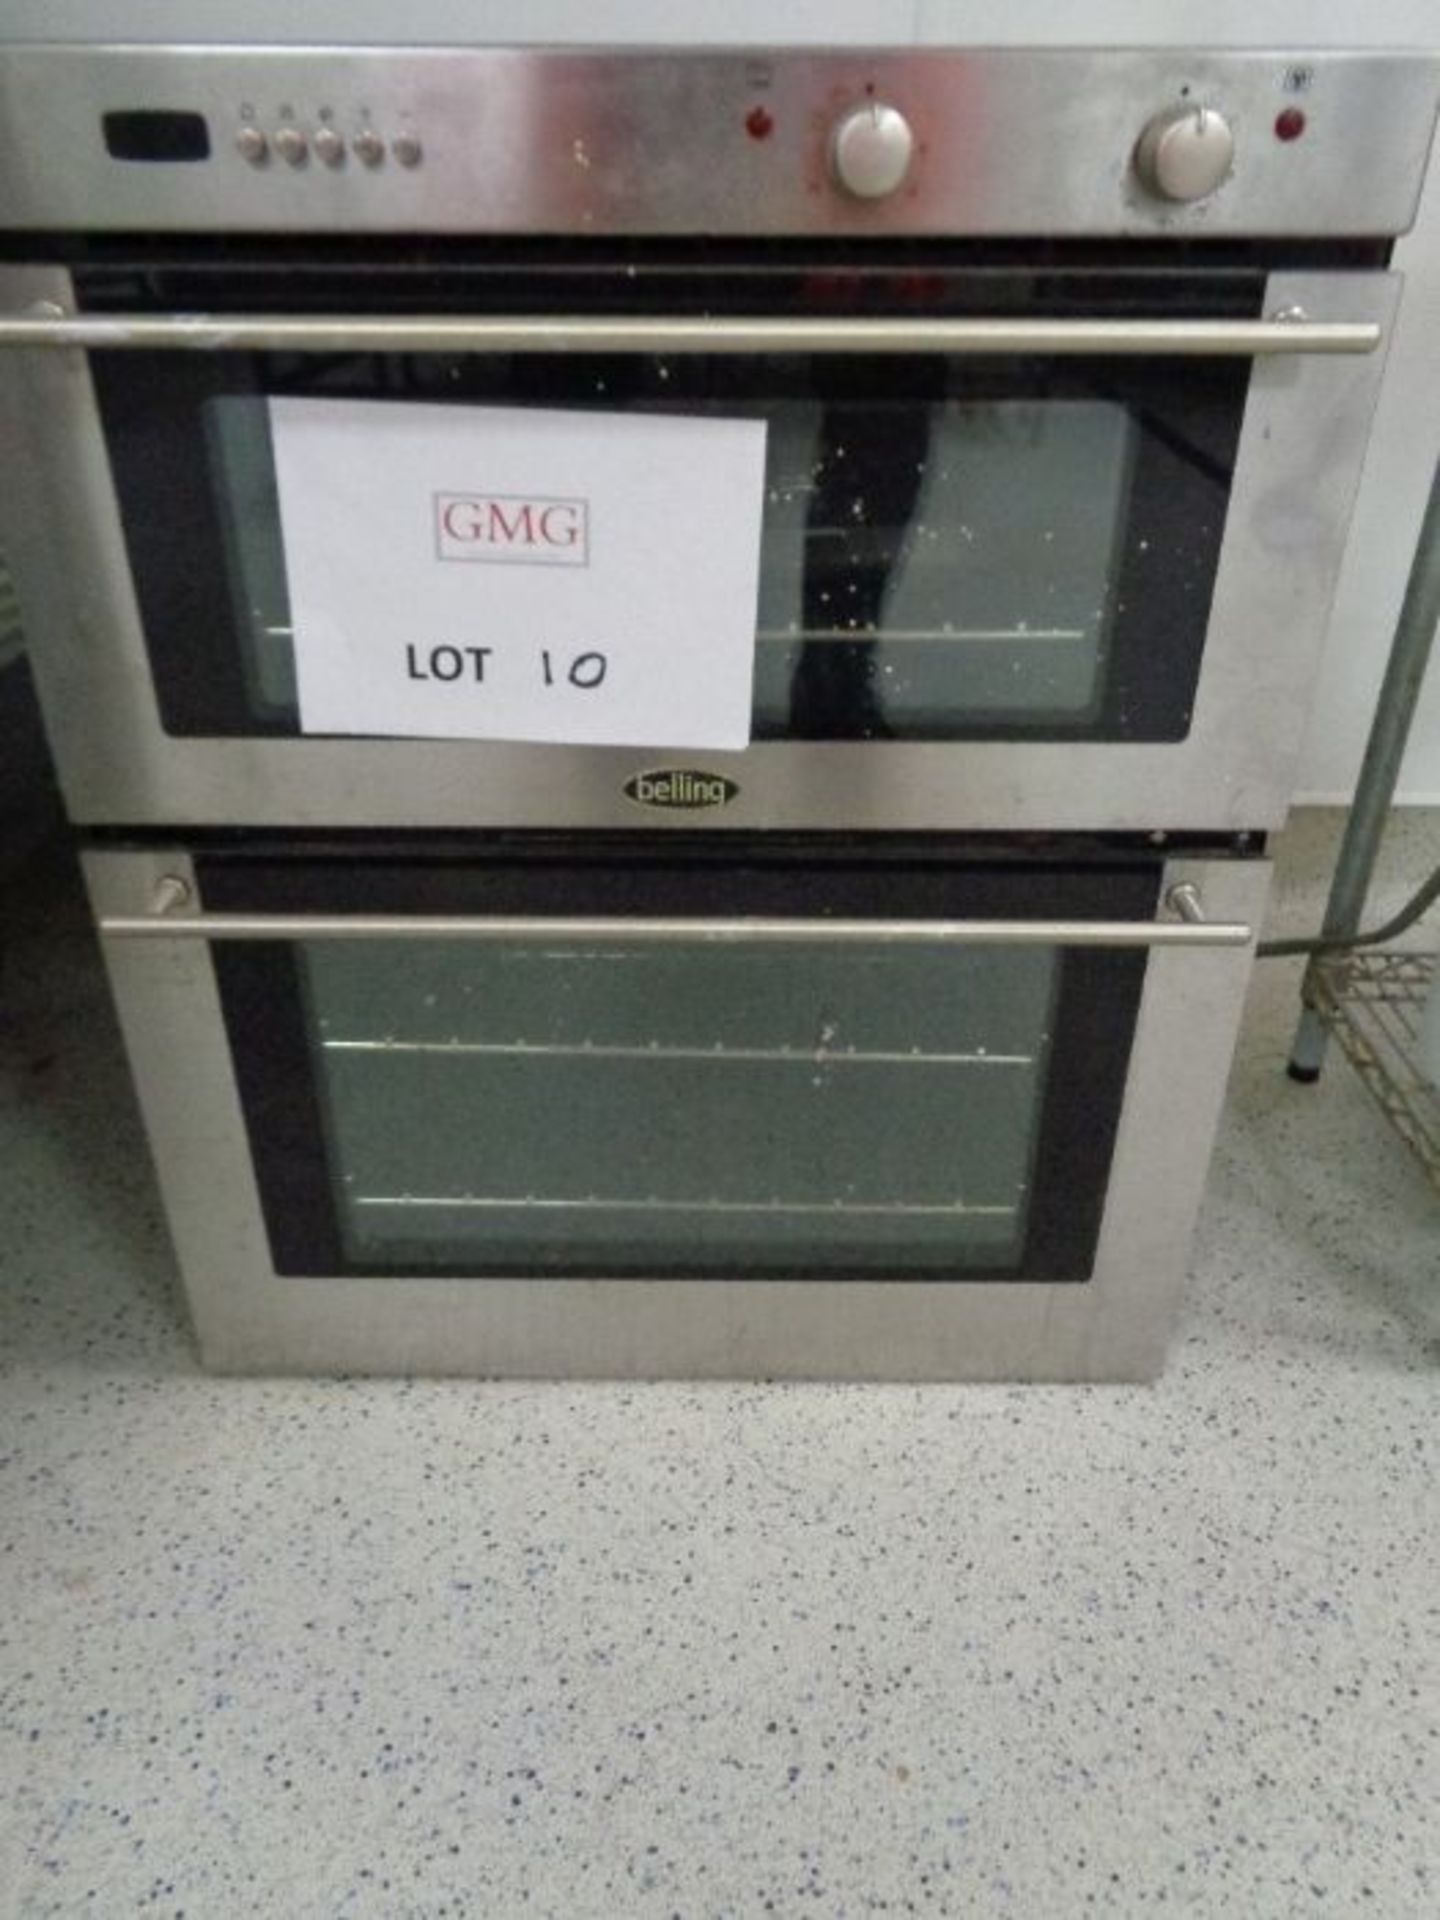 Belling oven and Grill